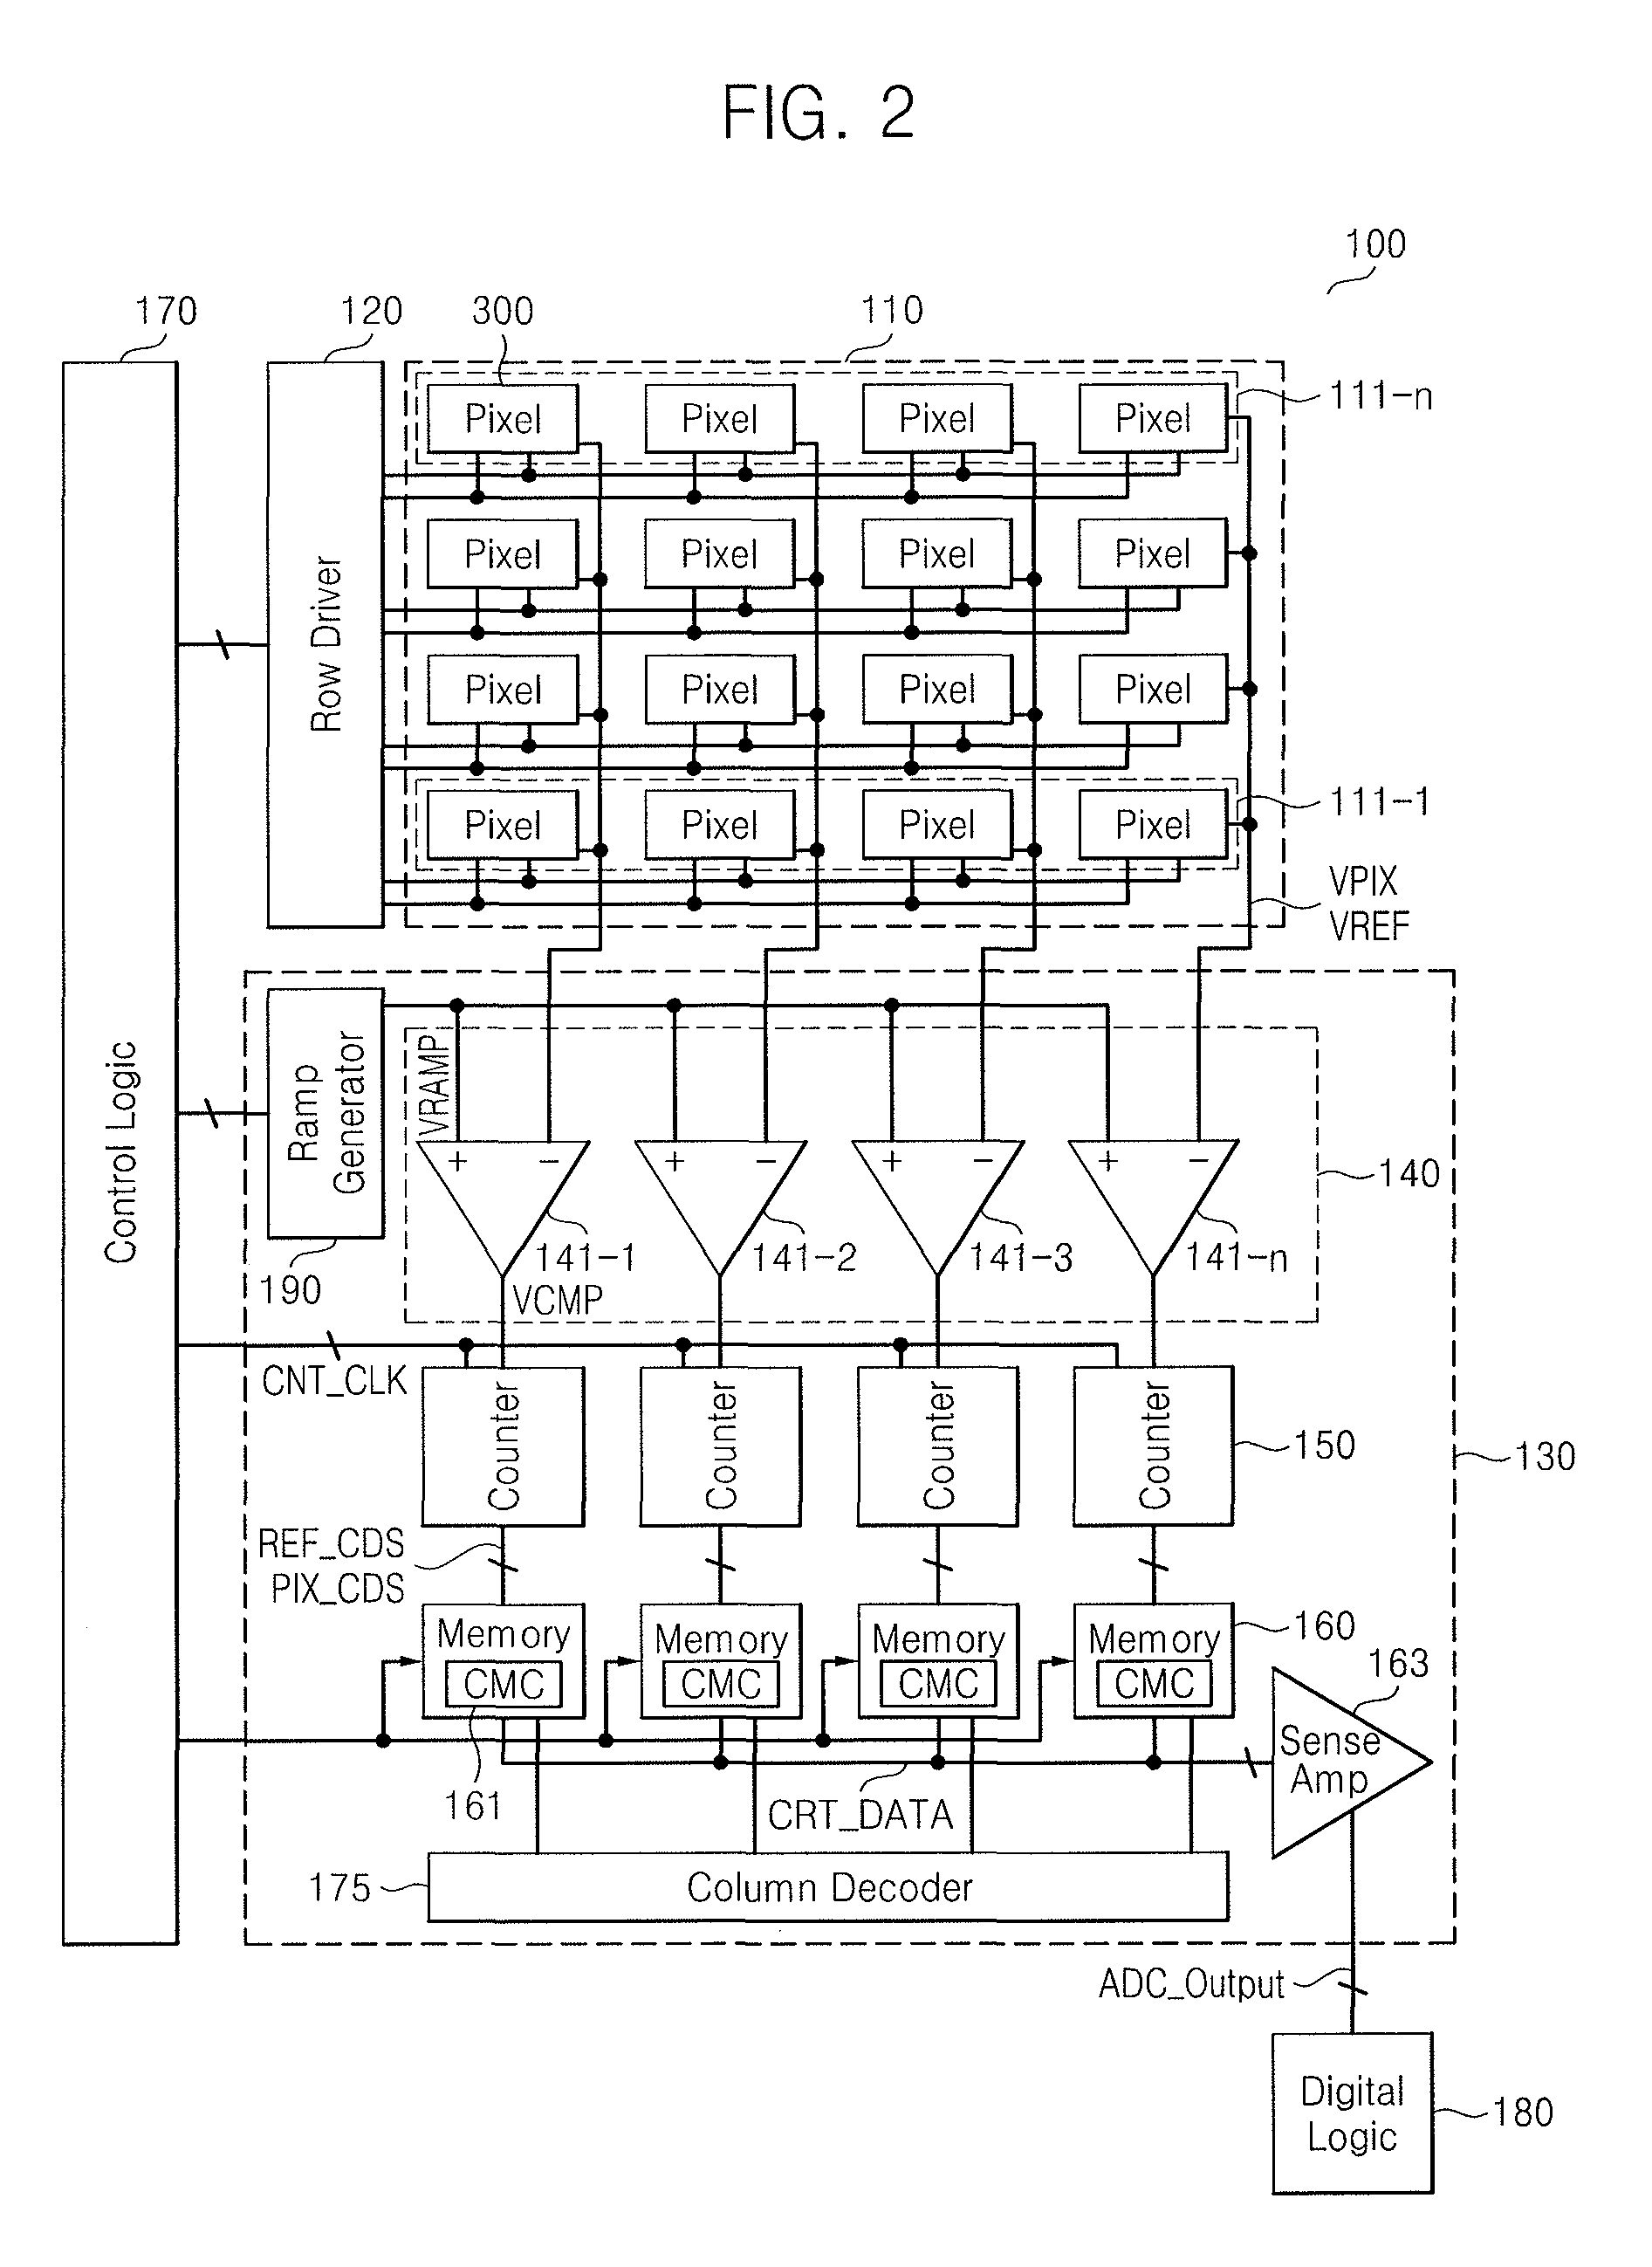 Image sensor for compensating column mismatch and method of processing image using the same